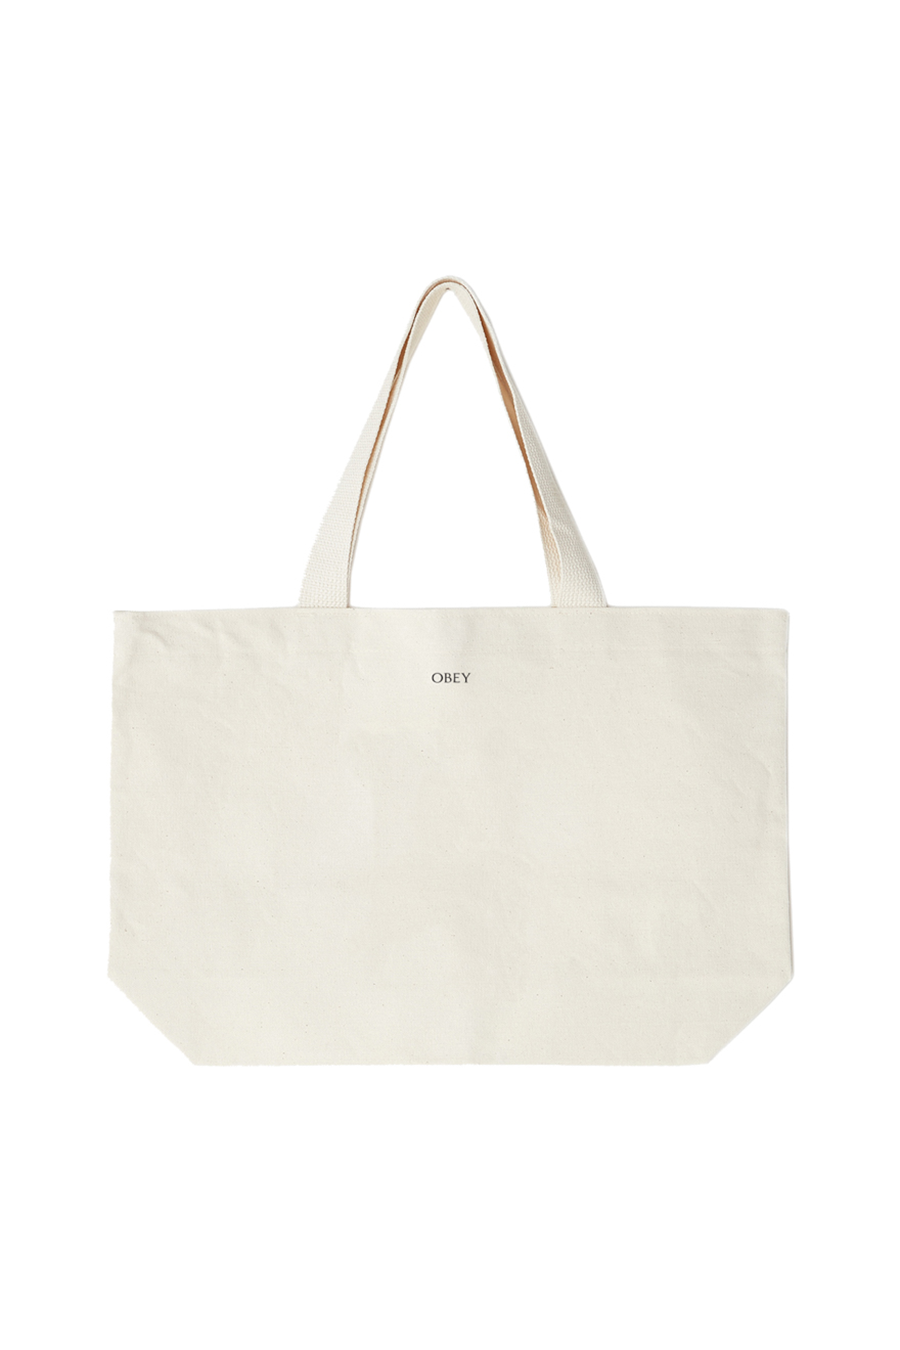 Obey Radical Peace Tote | Natural